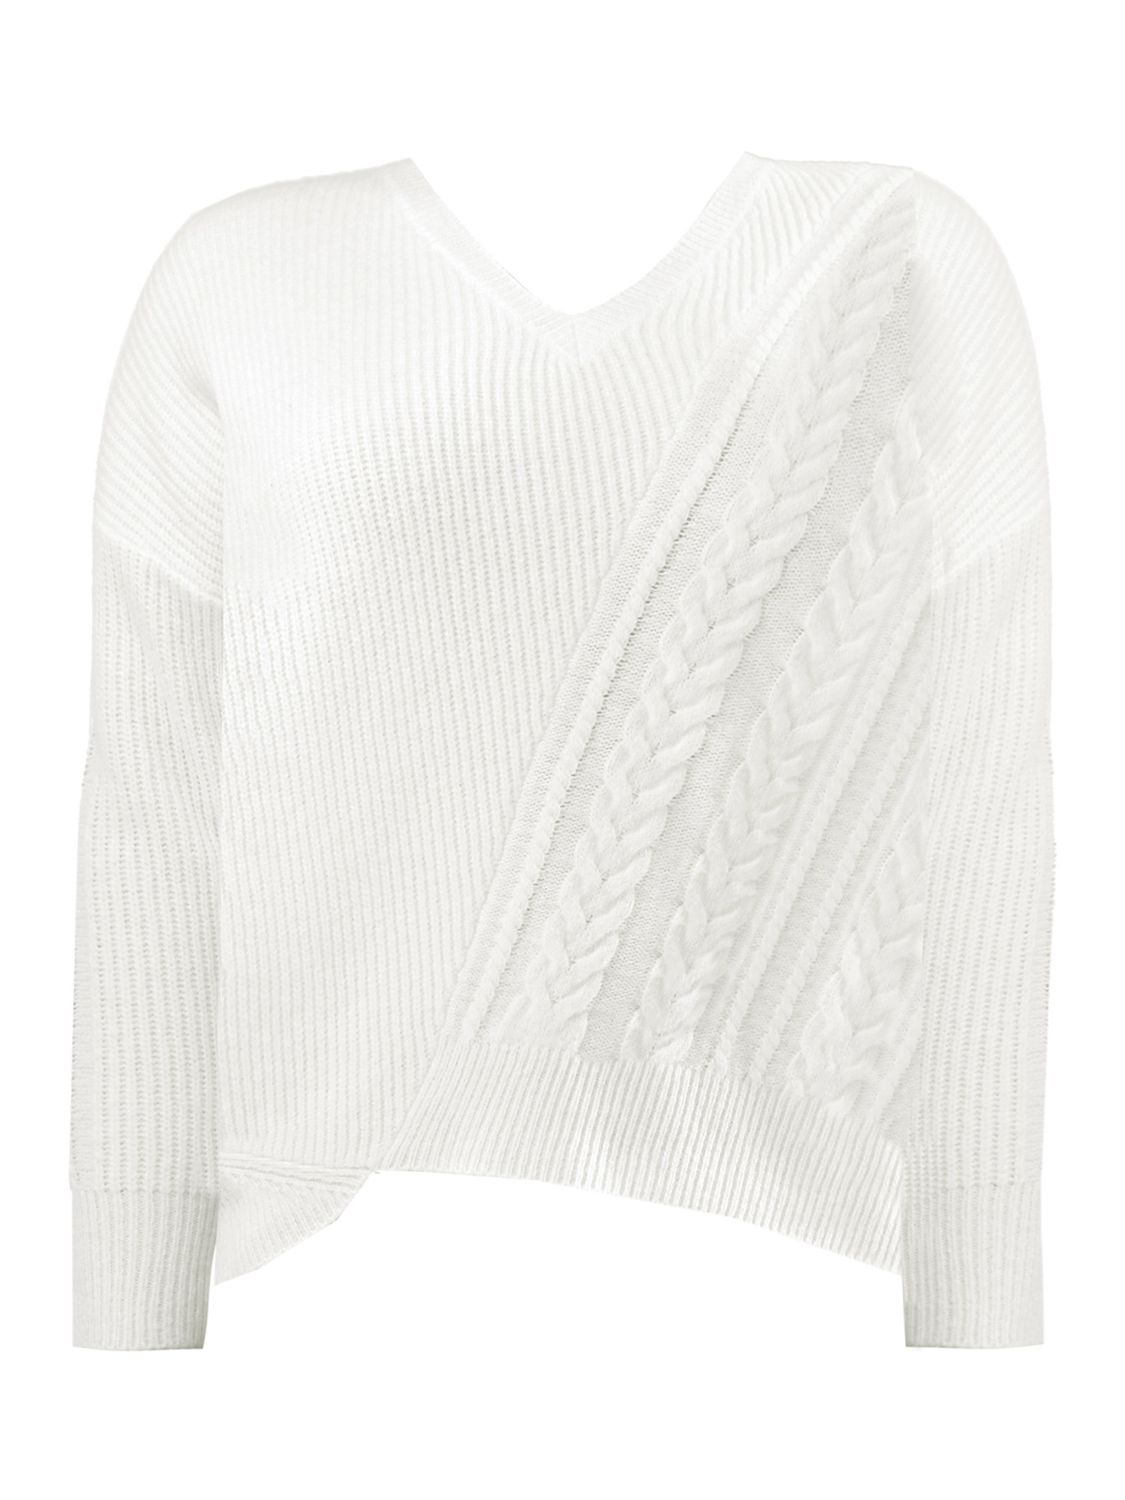 Buy Live Unlimited Curve Cable Detail Jumper, White Online at johnlewis.com